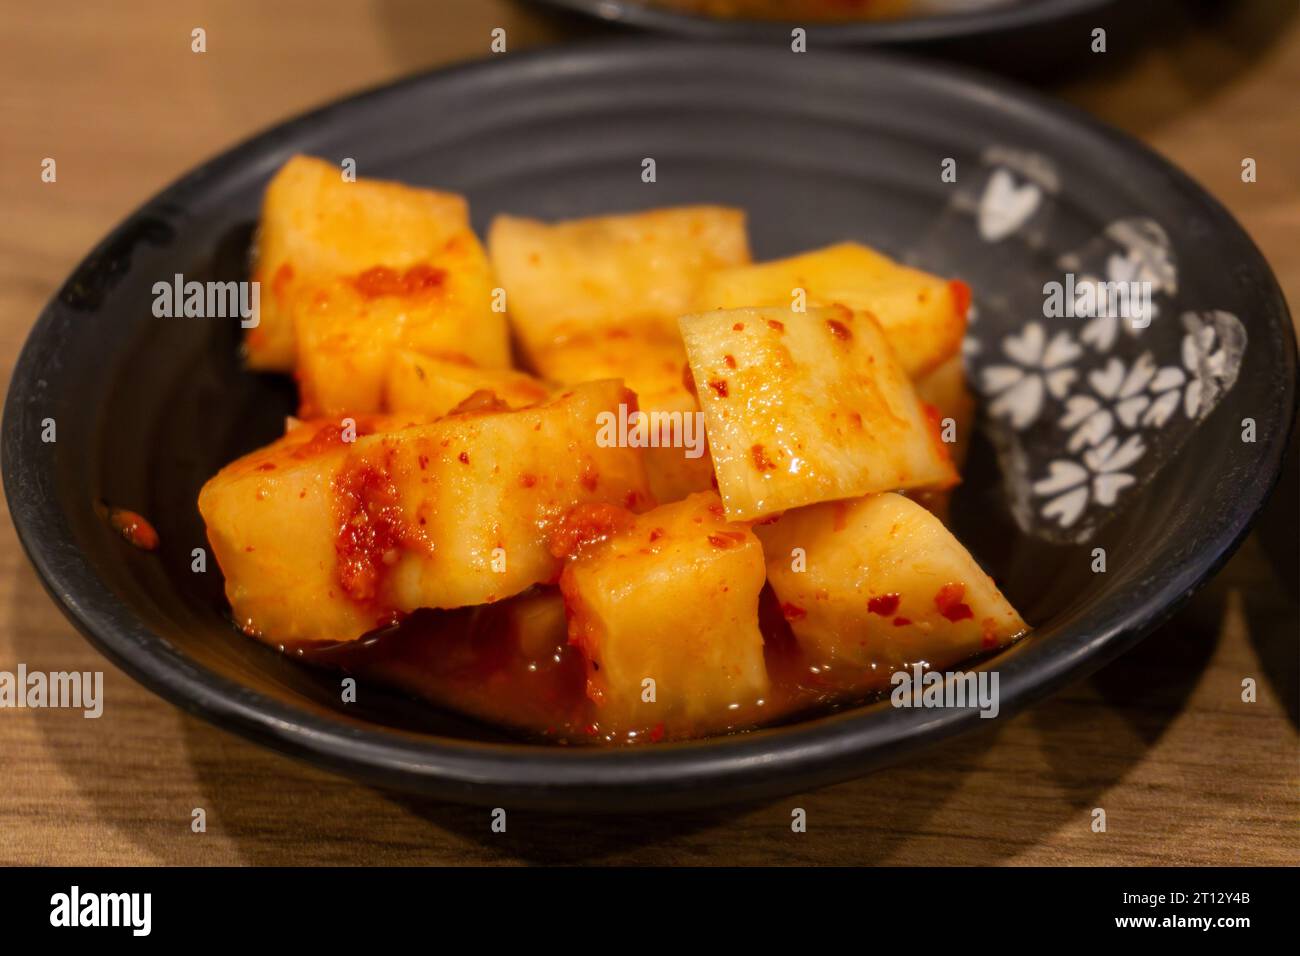 Spicy Korean fermented or aged radish known as Kimchi which is a traditional mainstay in Korean cuisine. Stock Photo